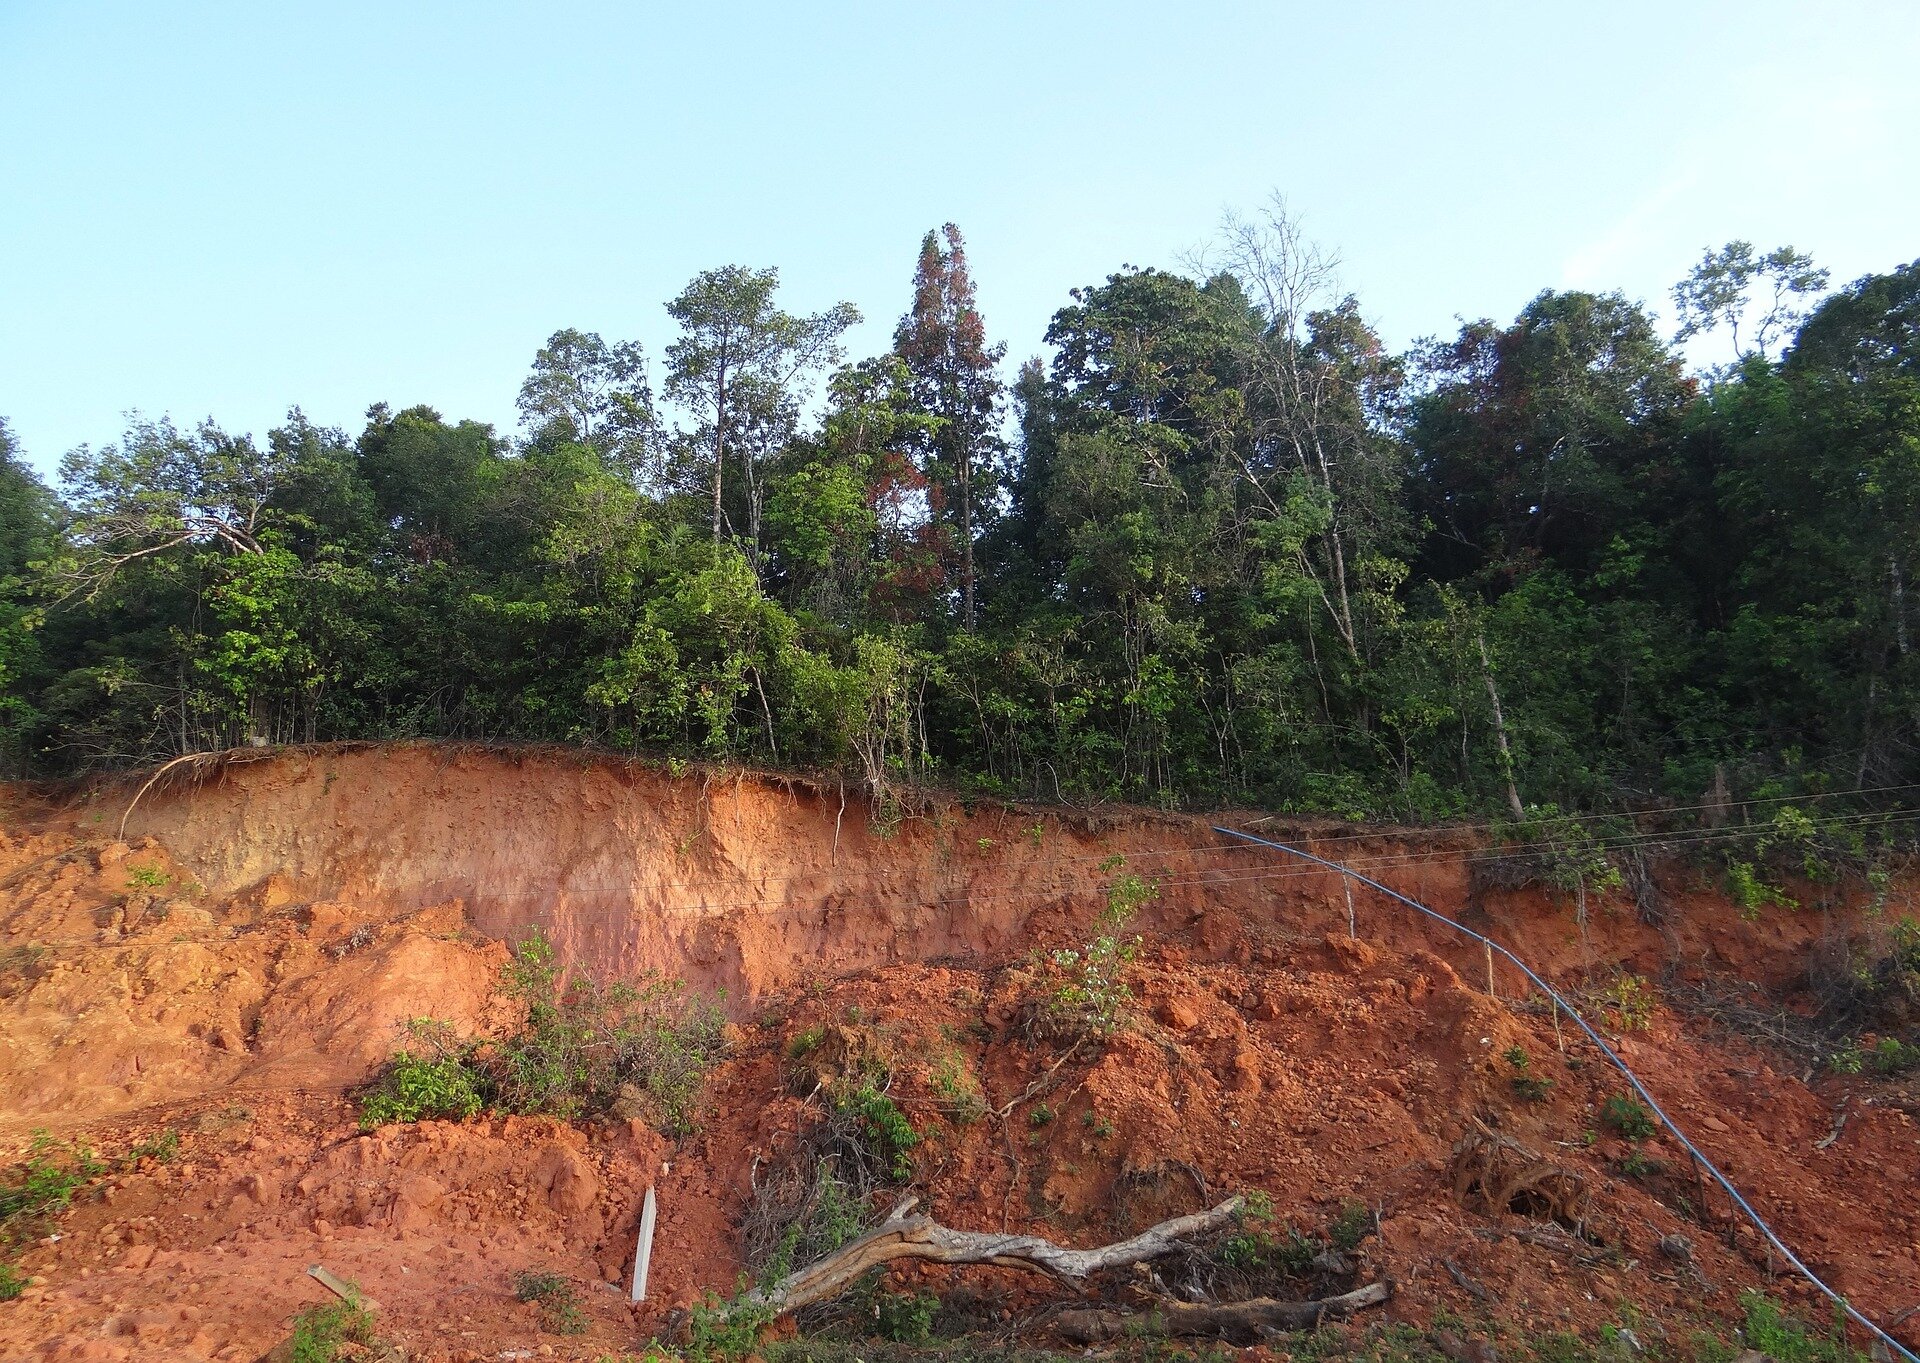 The study found that common minerals in red soil tend to lock up trace minerals over time